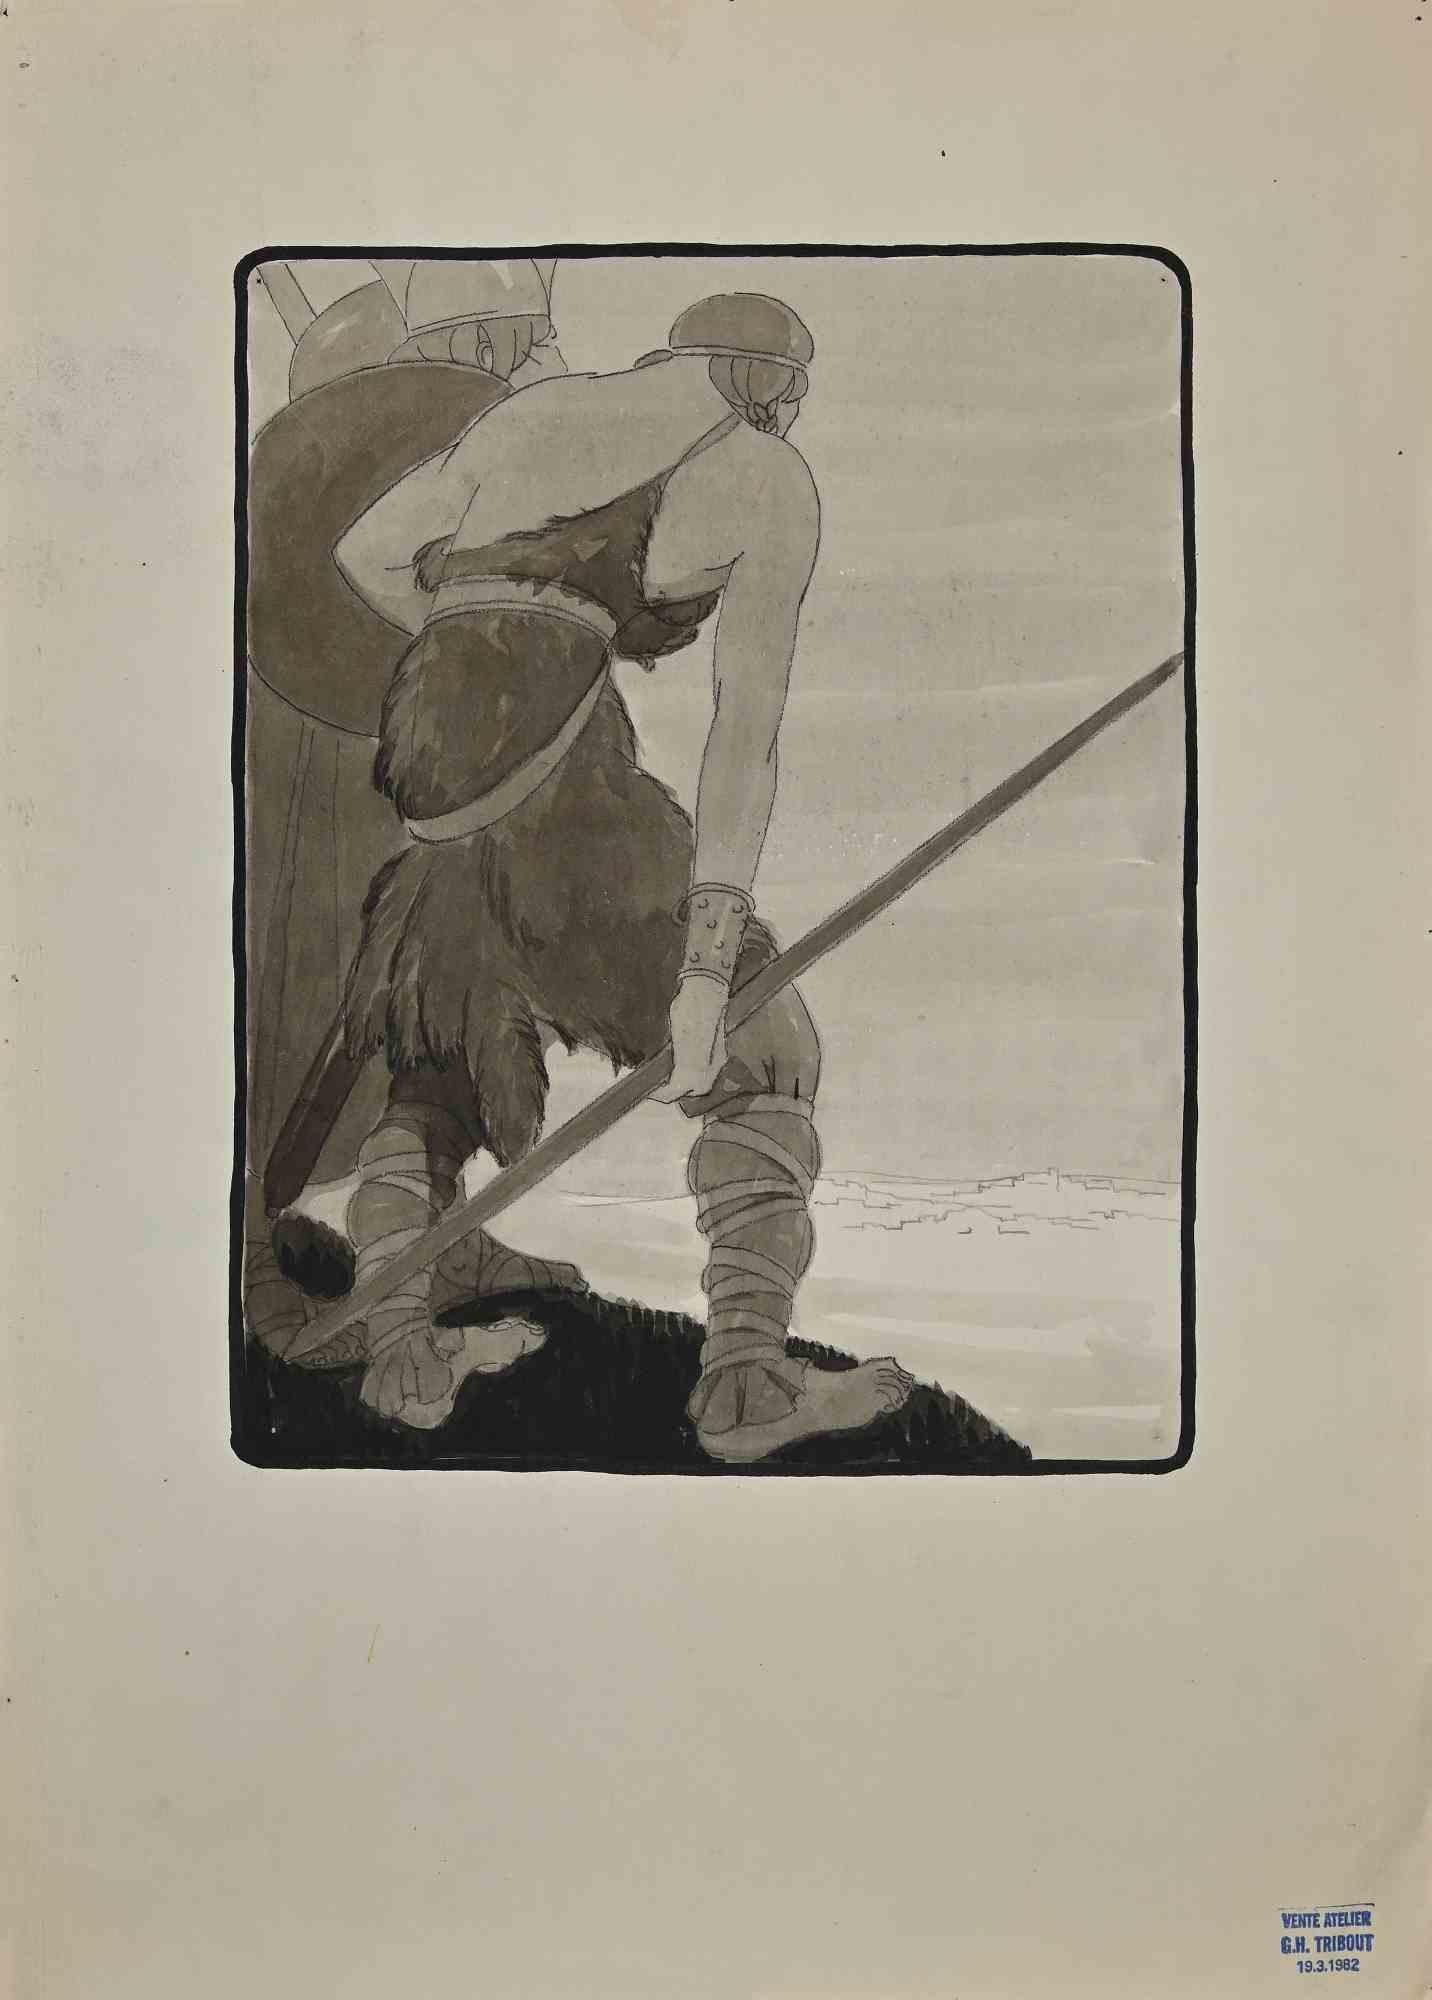 Georges-Henri Tribout Figurative Print - Viking  -Original Etching by George-Henri Tribout - 1940s